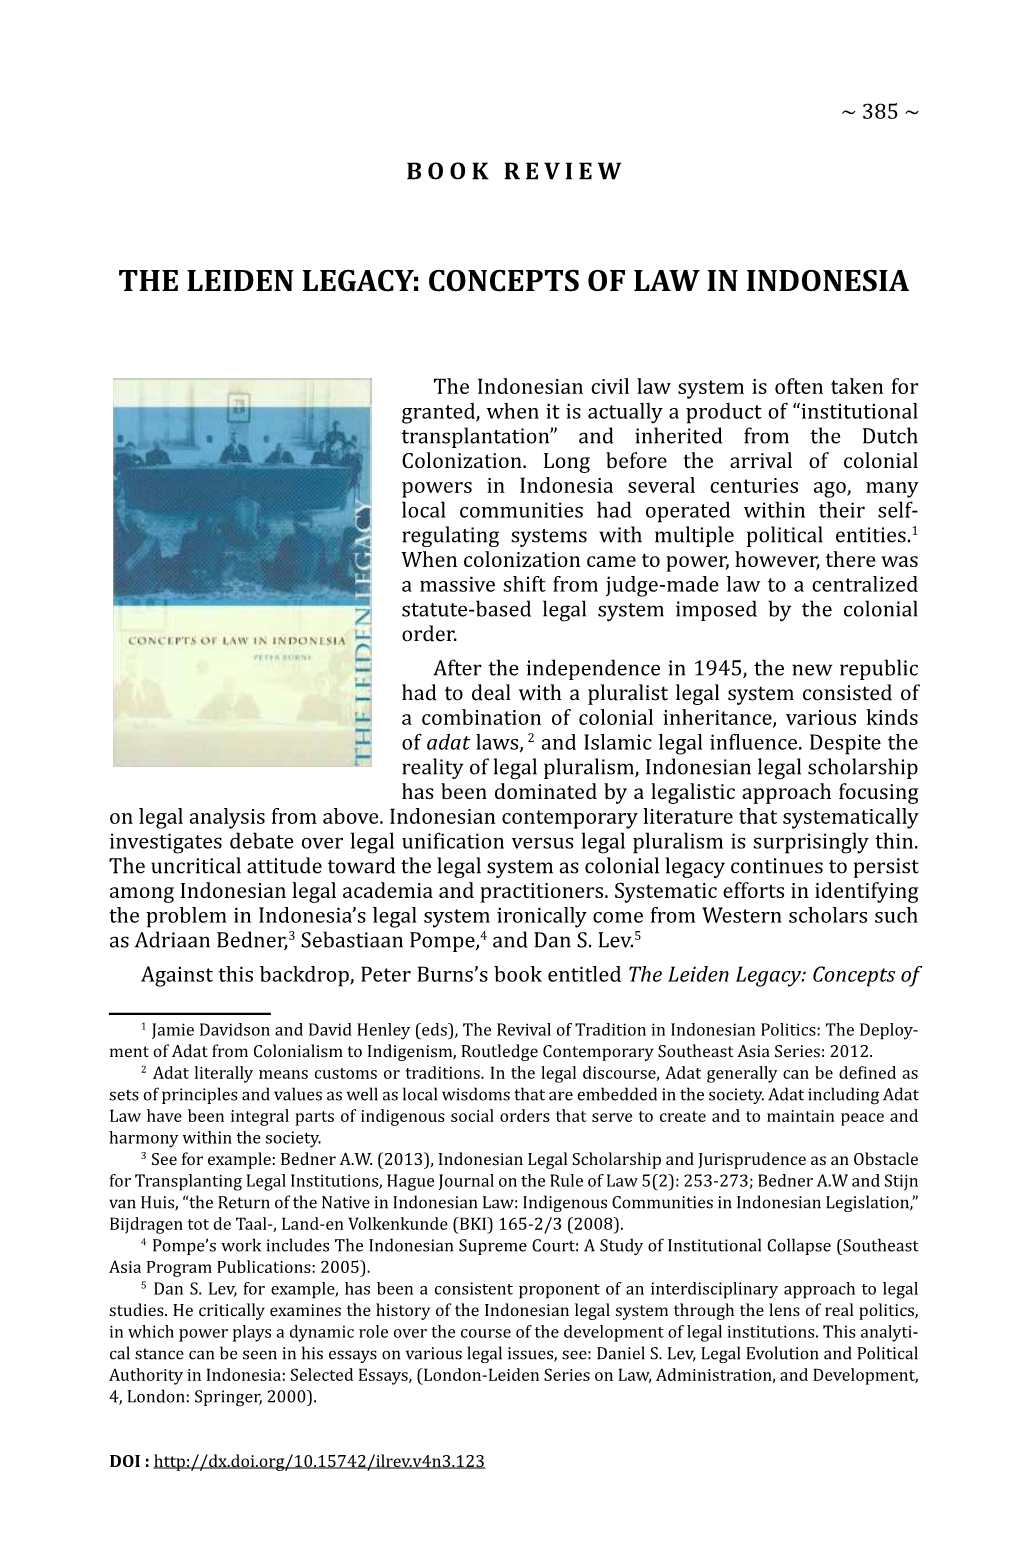 THE Leiden LEGACY: Concepts of LAW in Indonesia